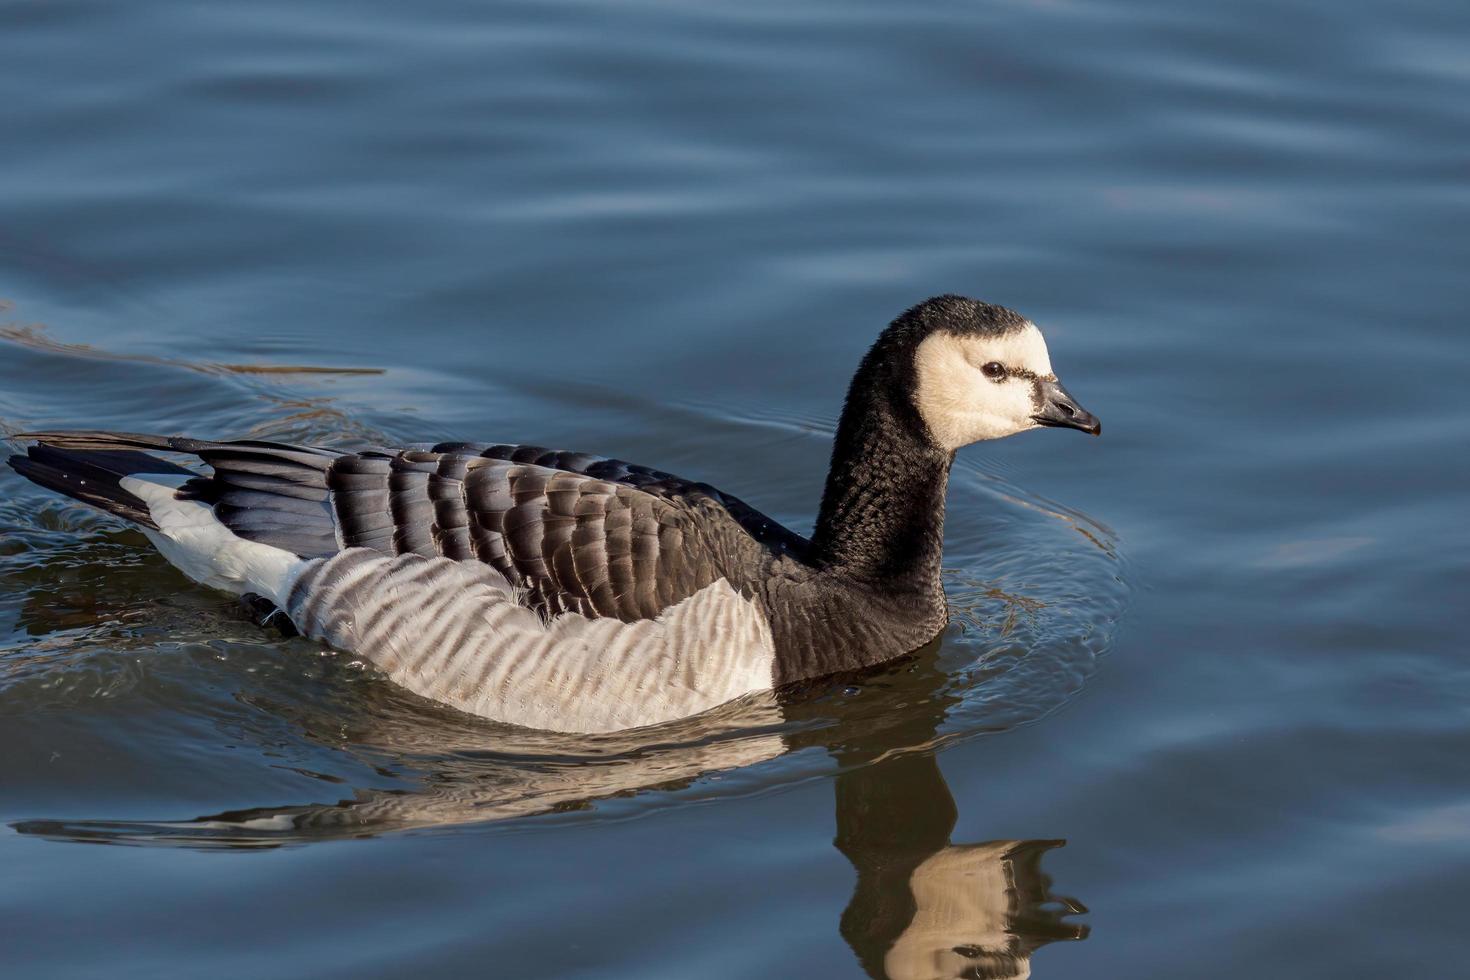 Barnacle Goose gliding through the water photo